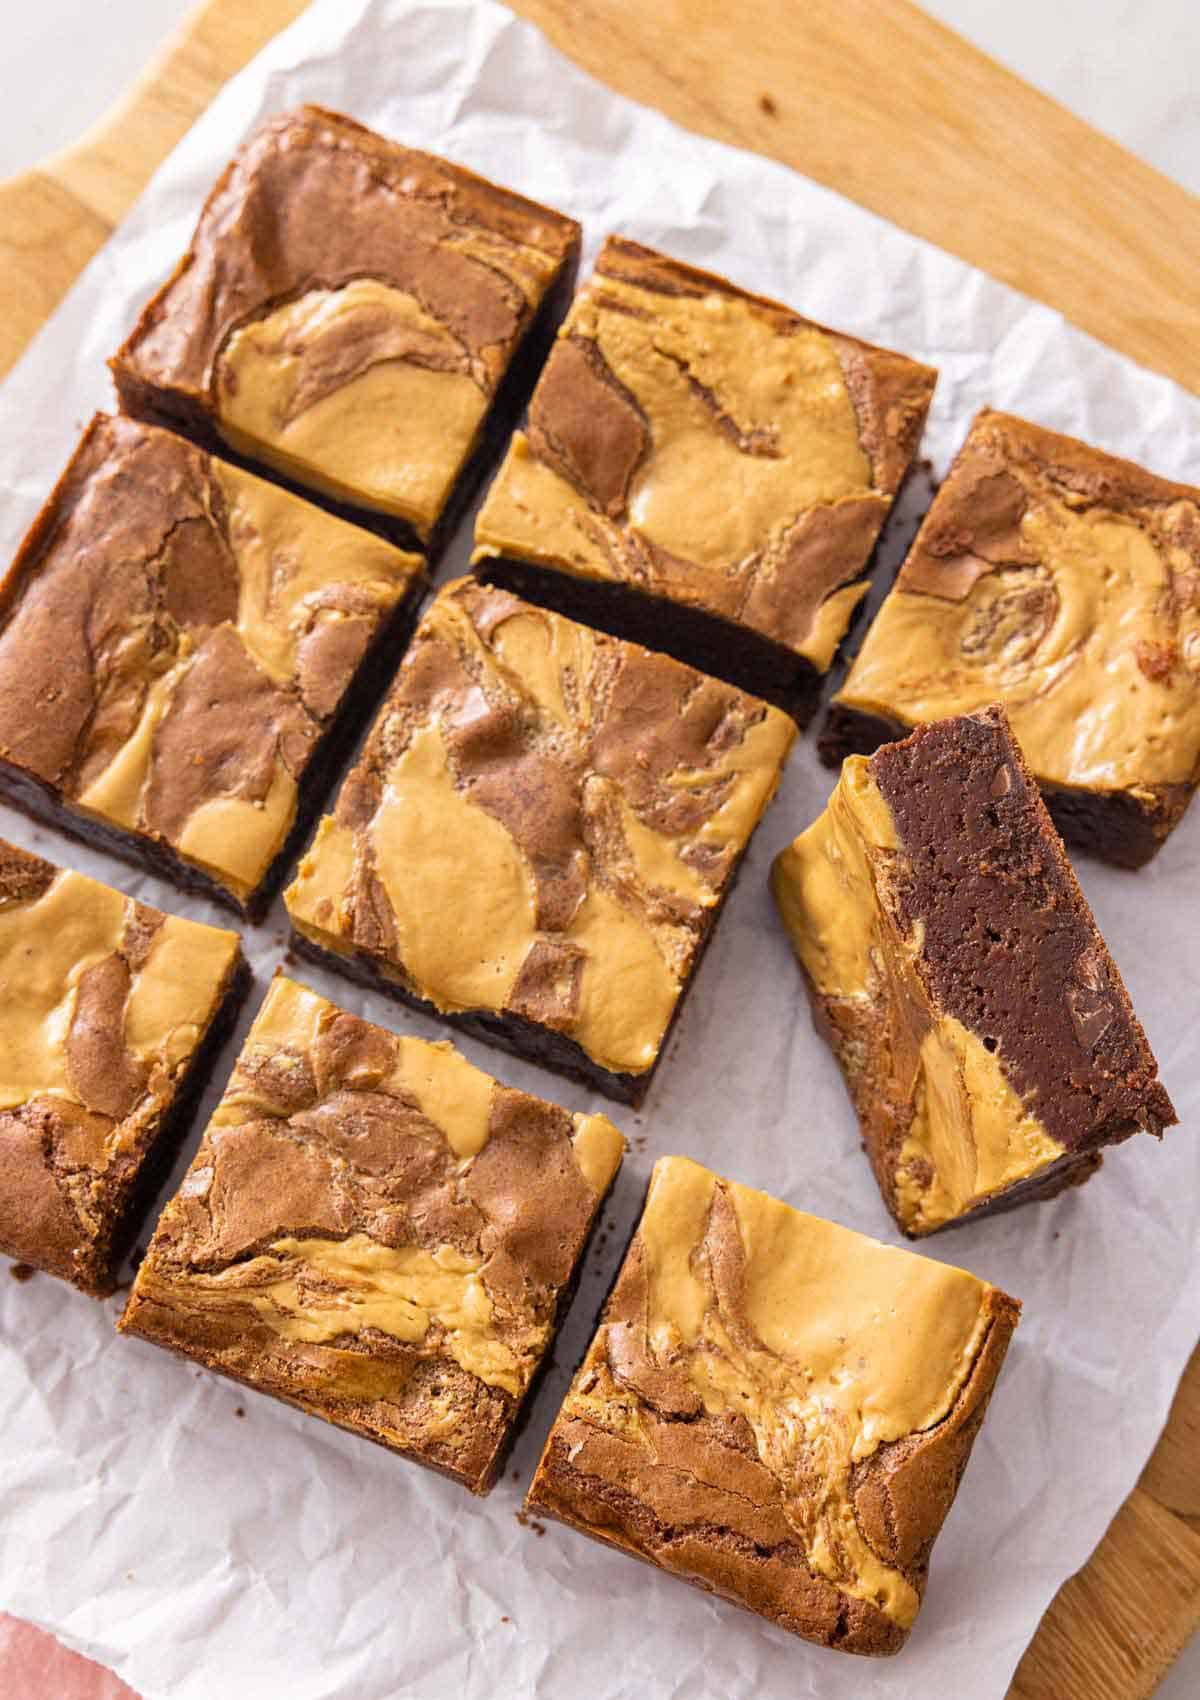 A cutting board of peanut butter brownies cut into 9 servings.